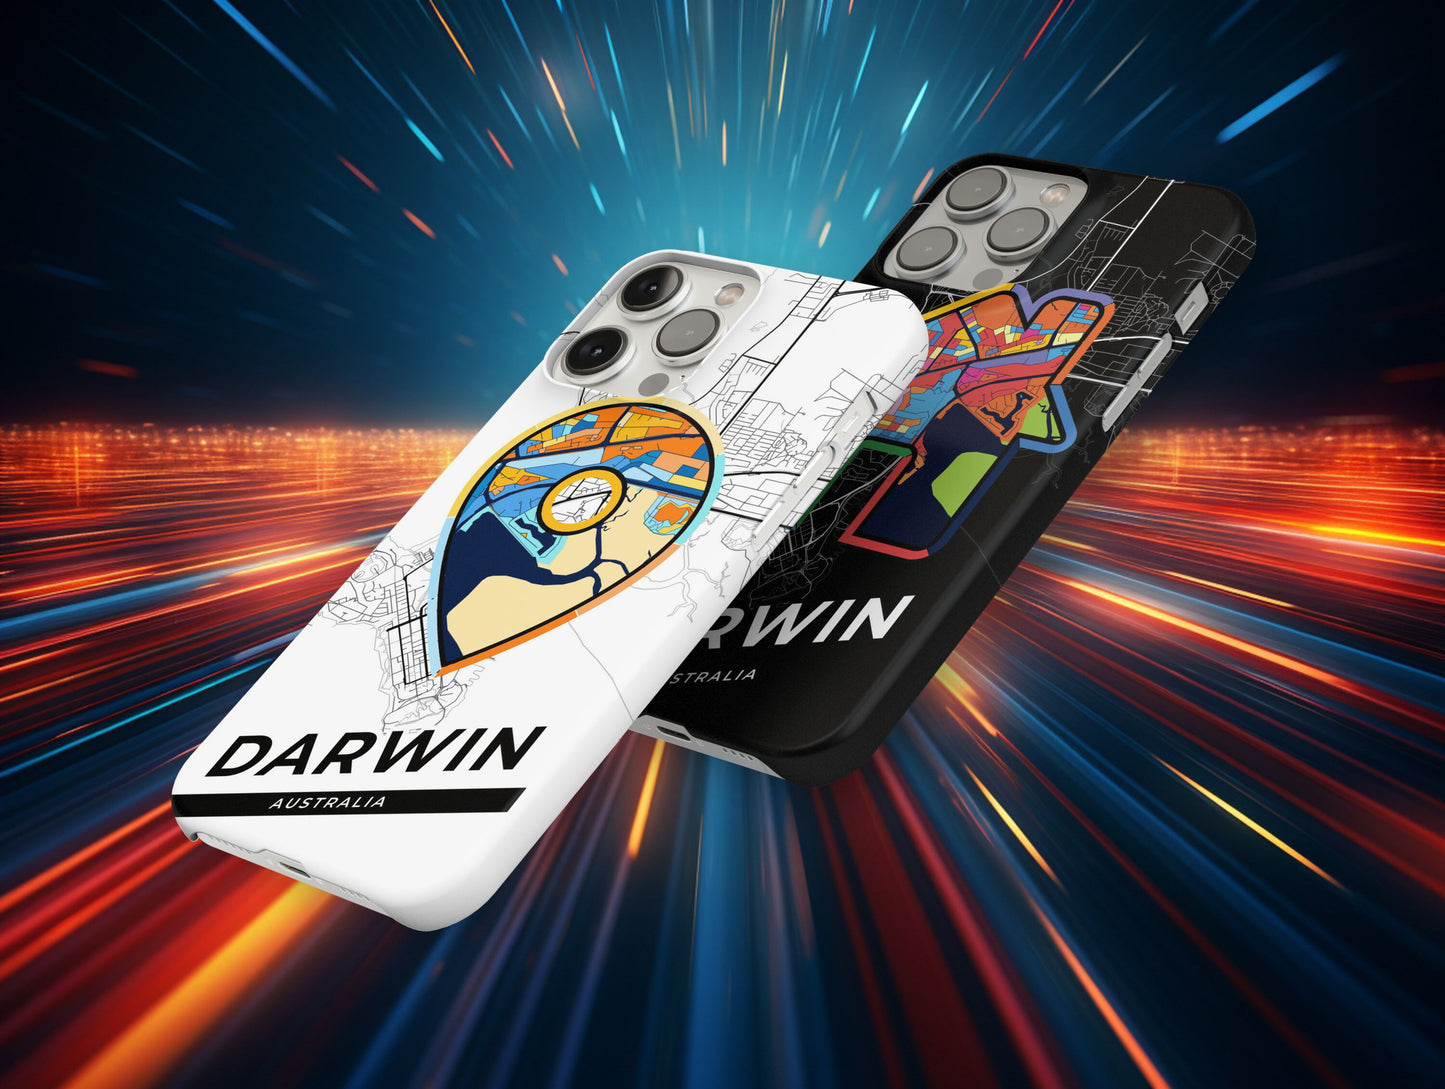 Darwin Australia slim phone case with colorful icon. Birthday, wedding or housewarming gift. Couple match cases.